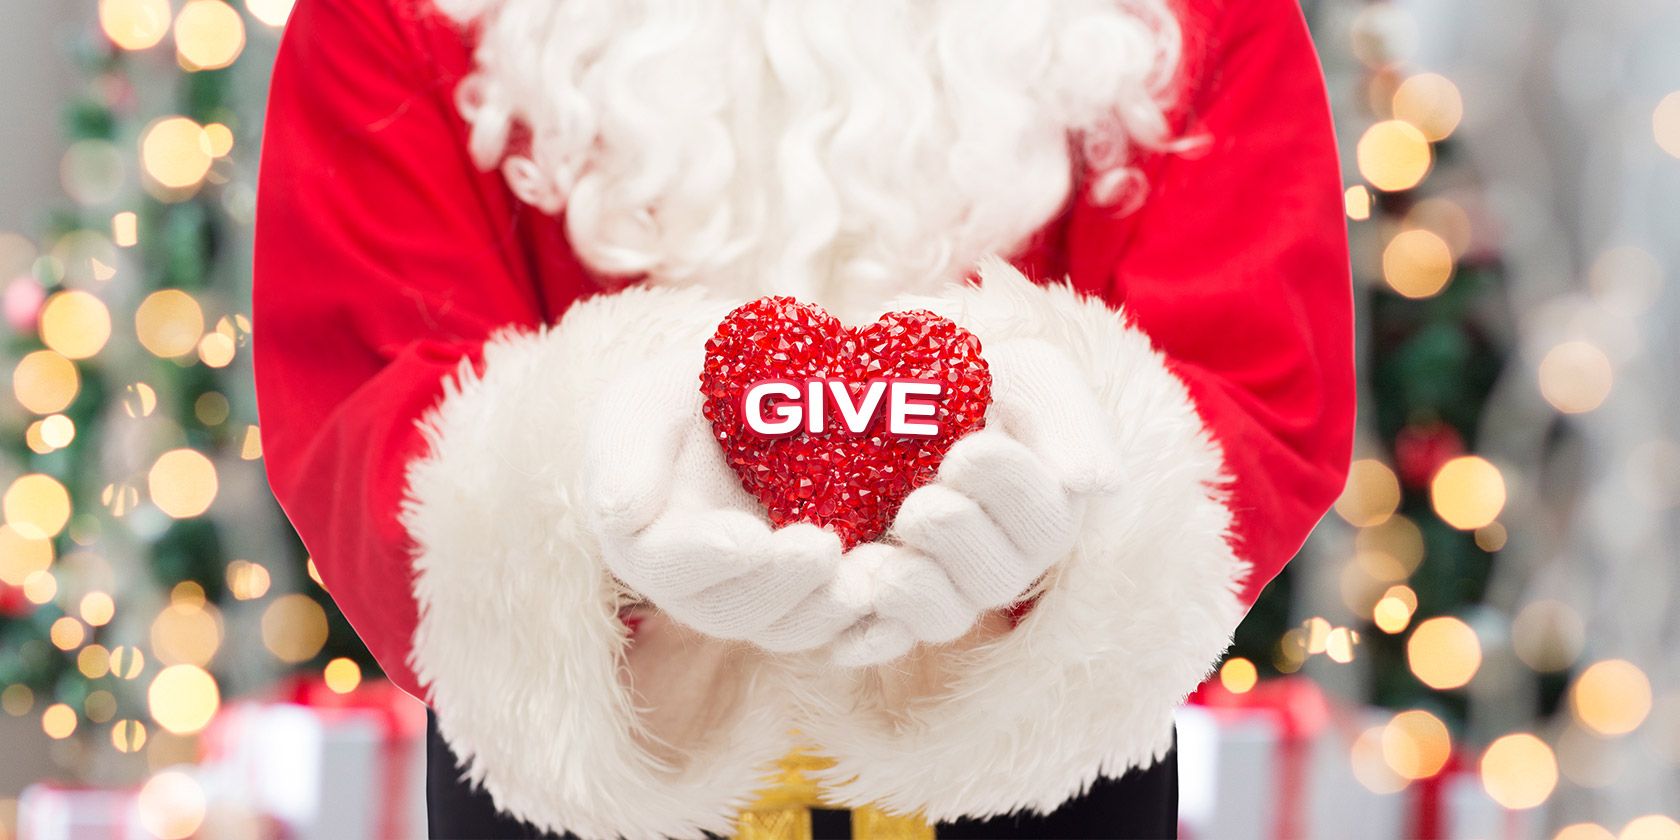 christmas assistance programs list 2020 near me Top 7 Christmas Charity Organizations That Help Low Income Families christmas assistance programs list 2020 near me